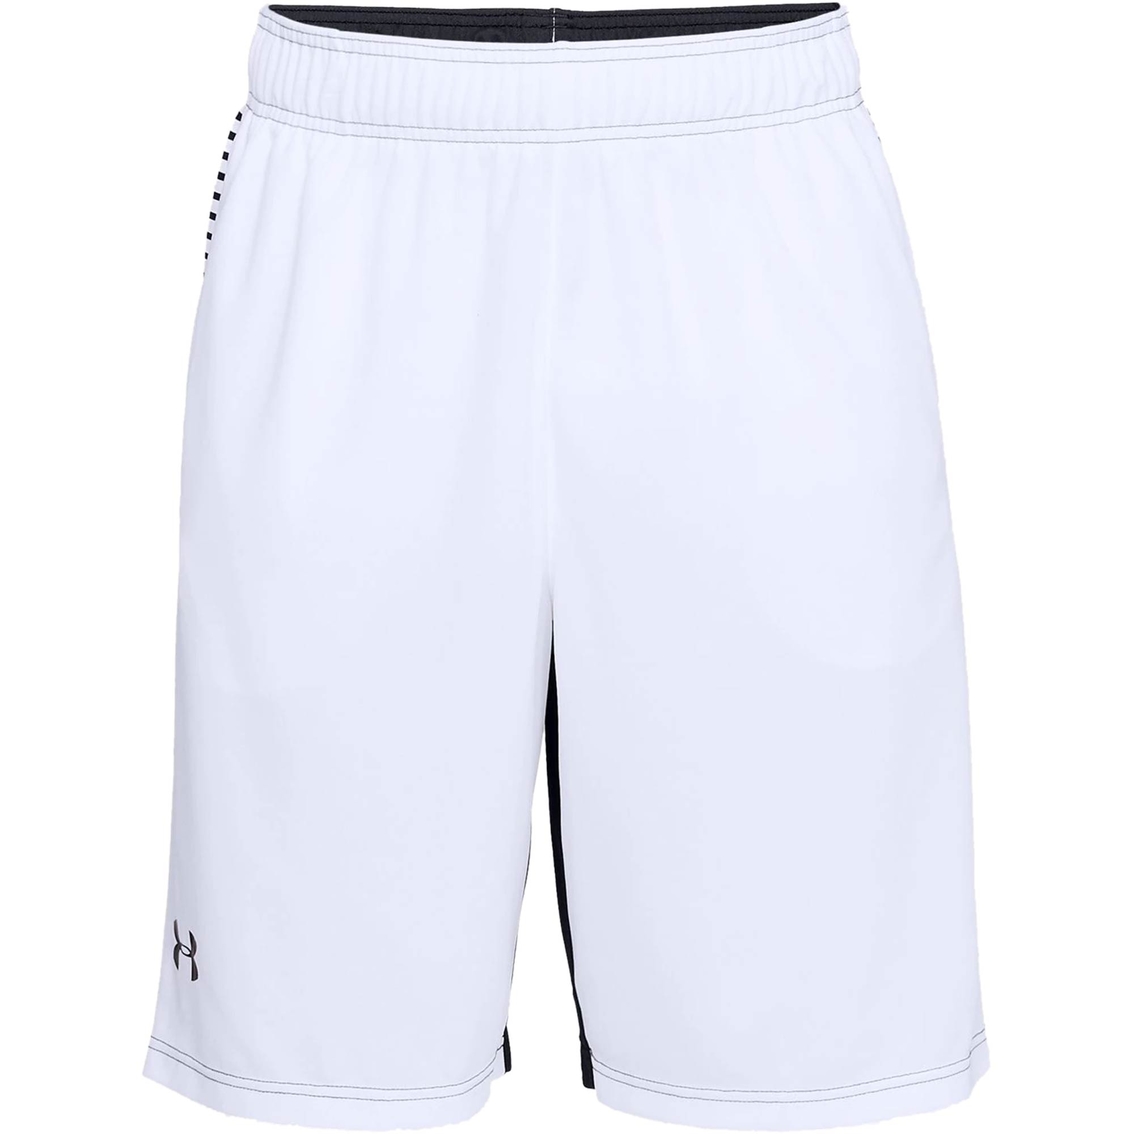 Under Armour Basketball 10 in. Shorts - Image 4 of 5